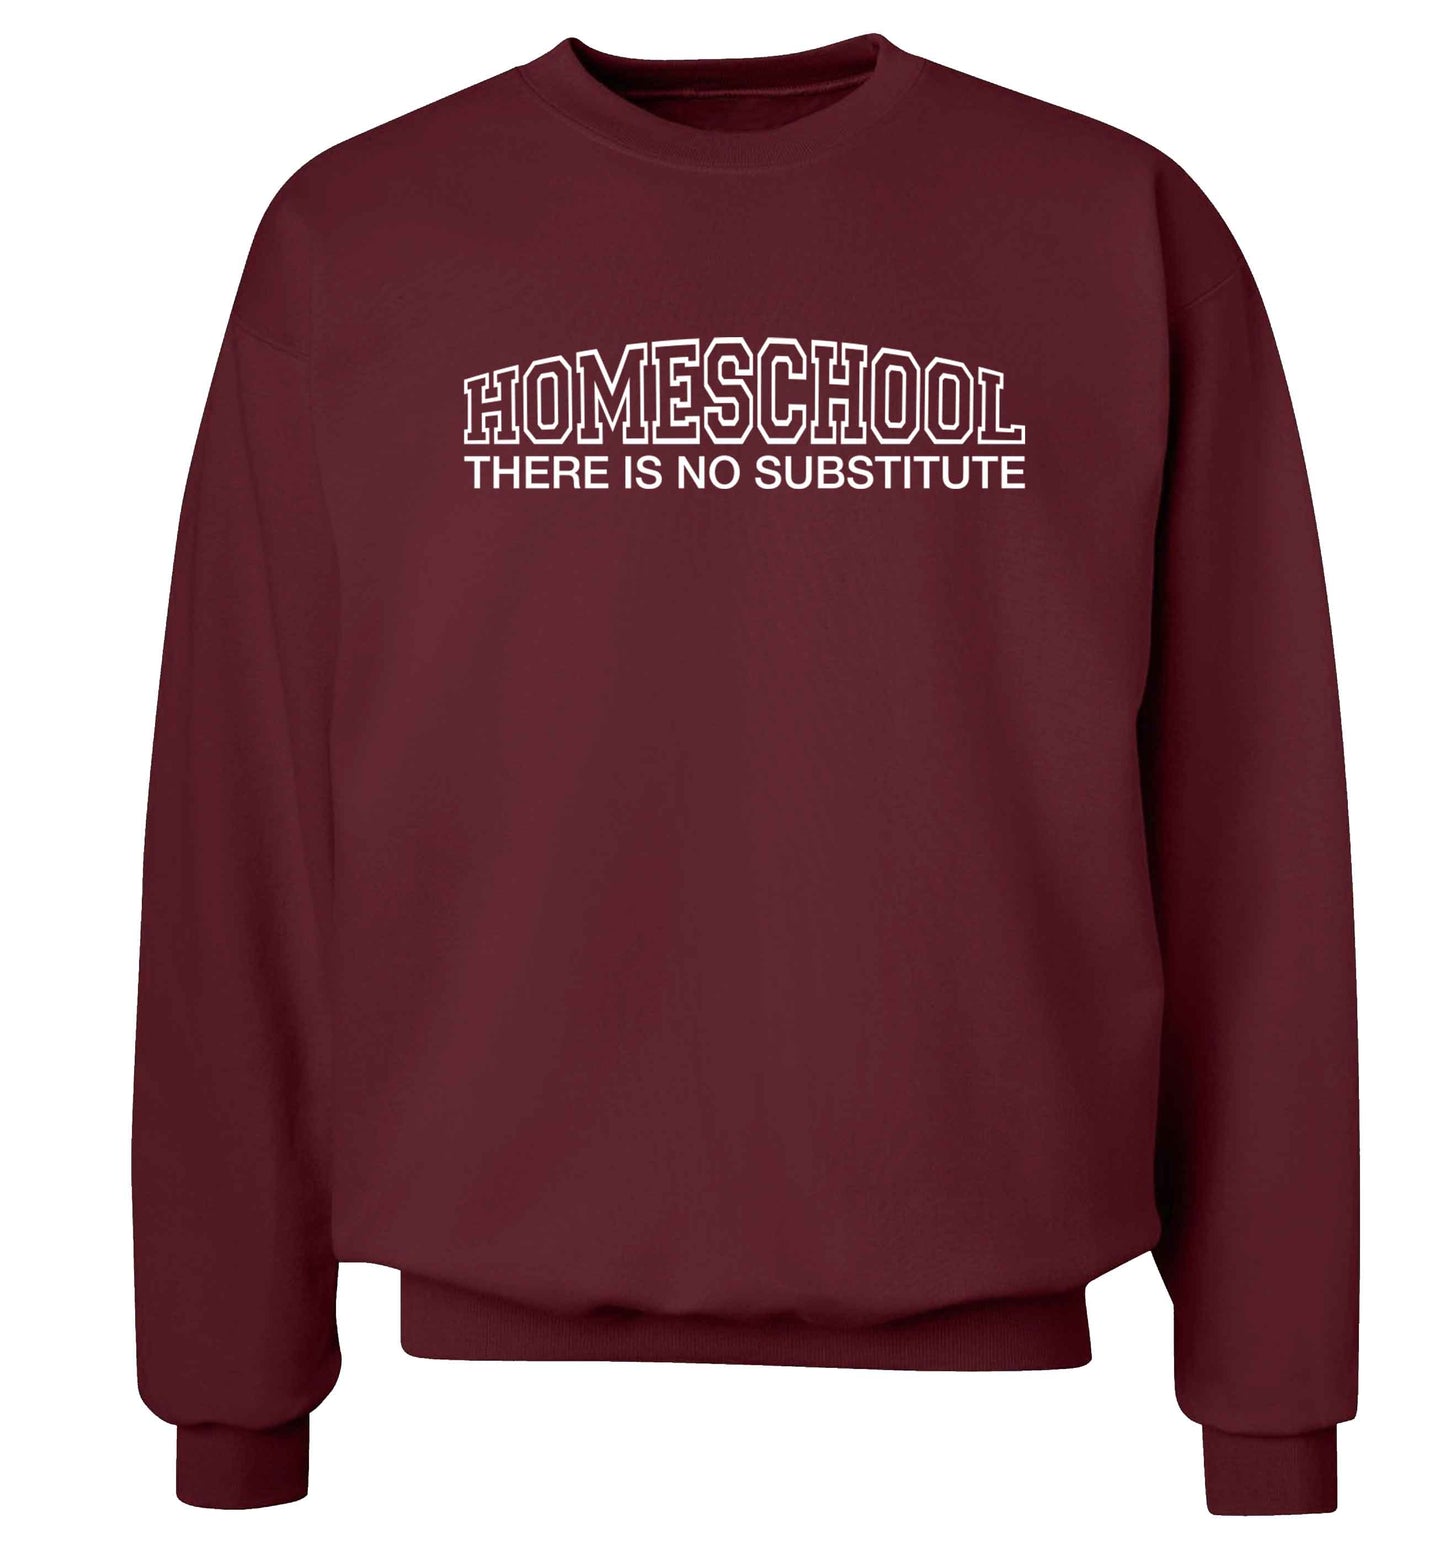 Homeschool there is not substitute Adult's unisex maroon Sweater 2XL